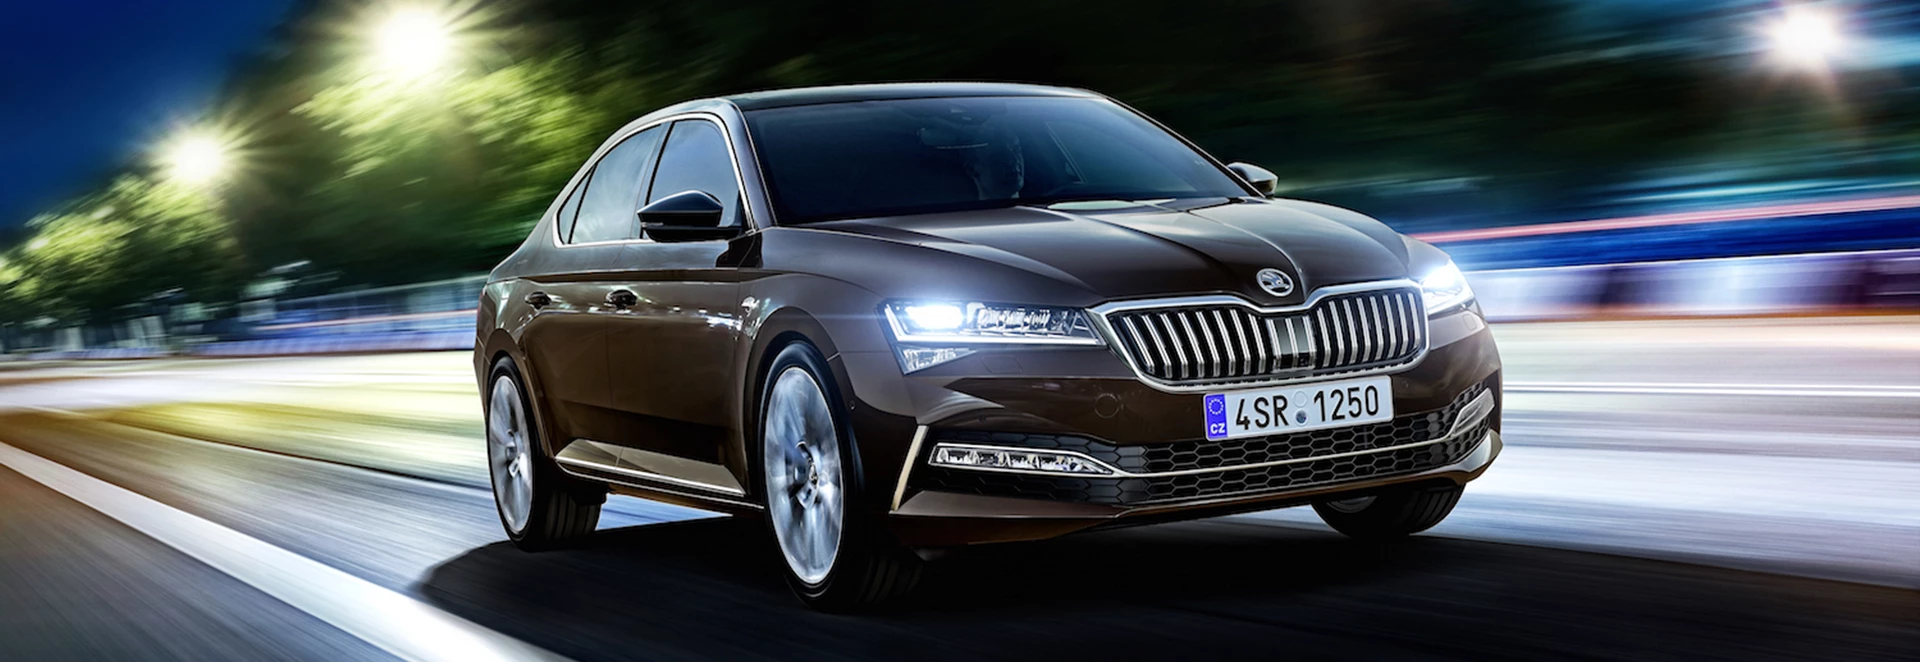 Skoda’s new facelifted Superb continues to set the benchmark for the firm